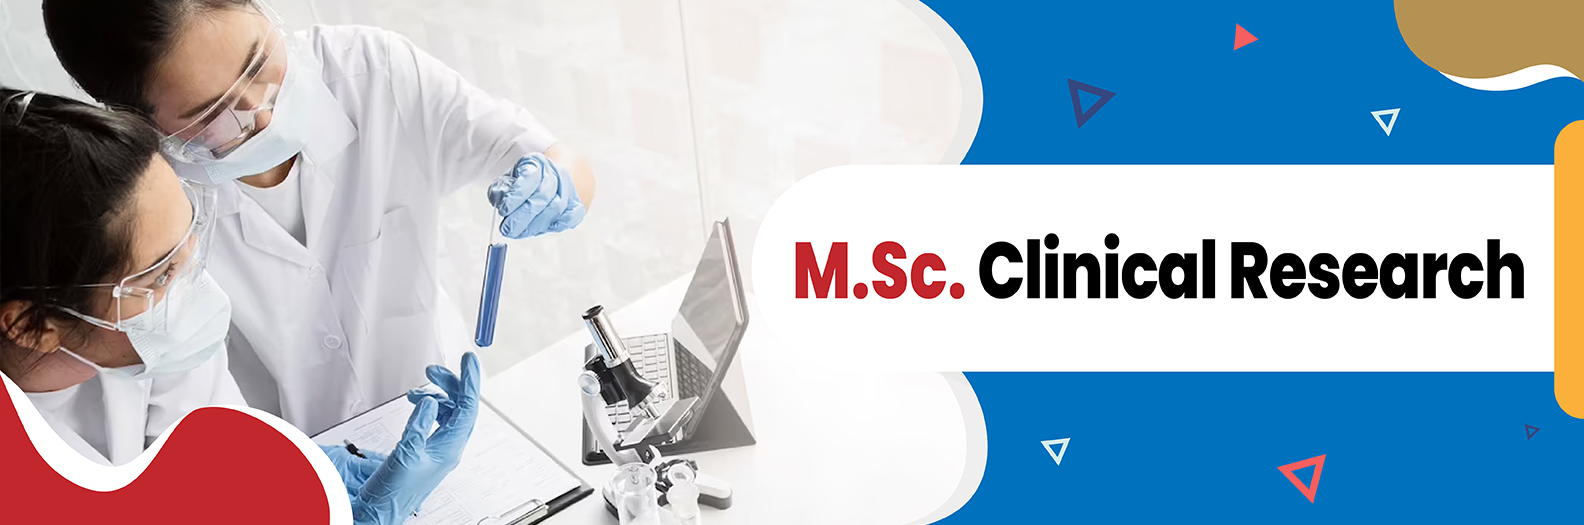 M.Sc. Clinical Research